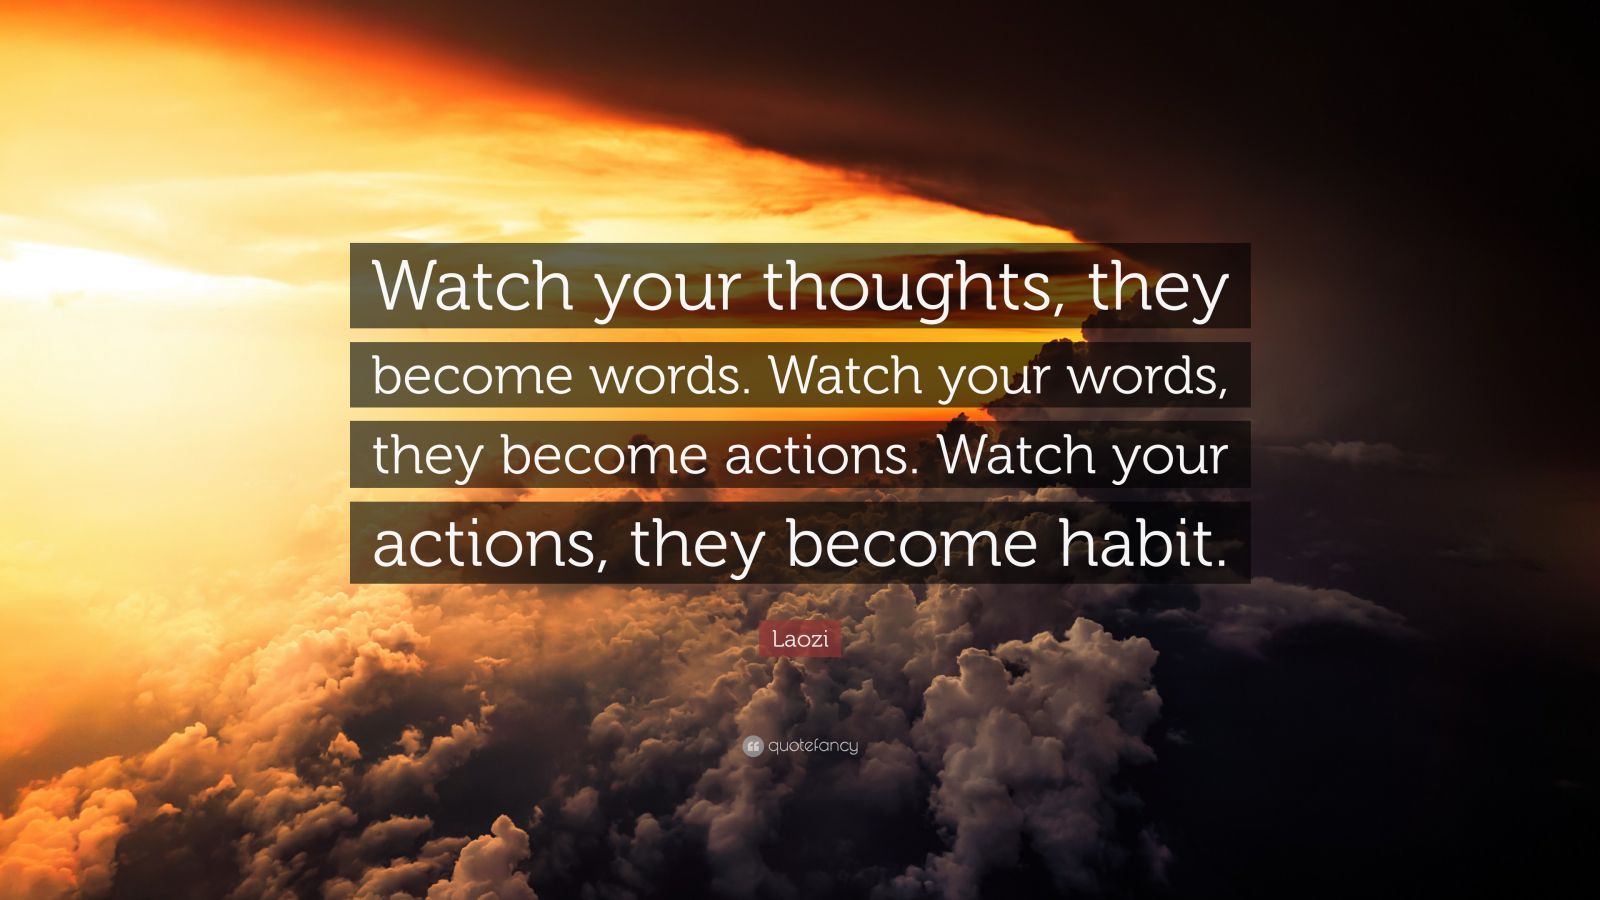 watch your thoughts they become words huge